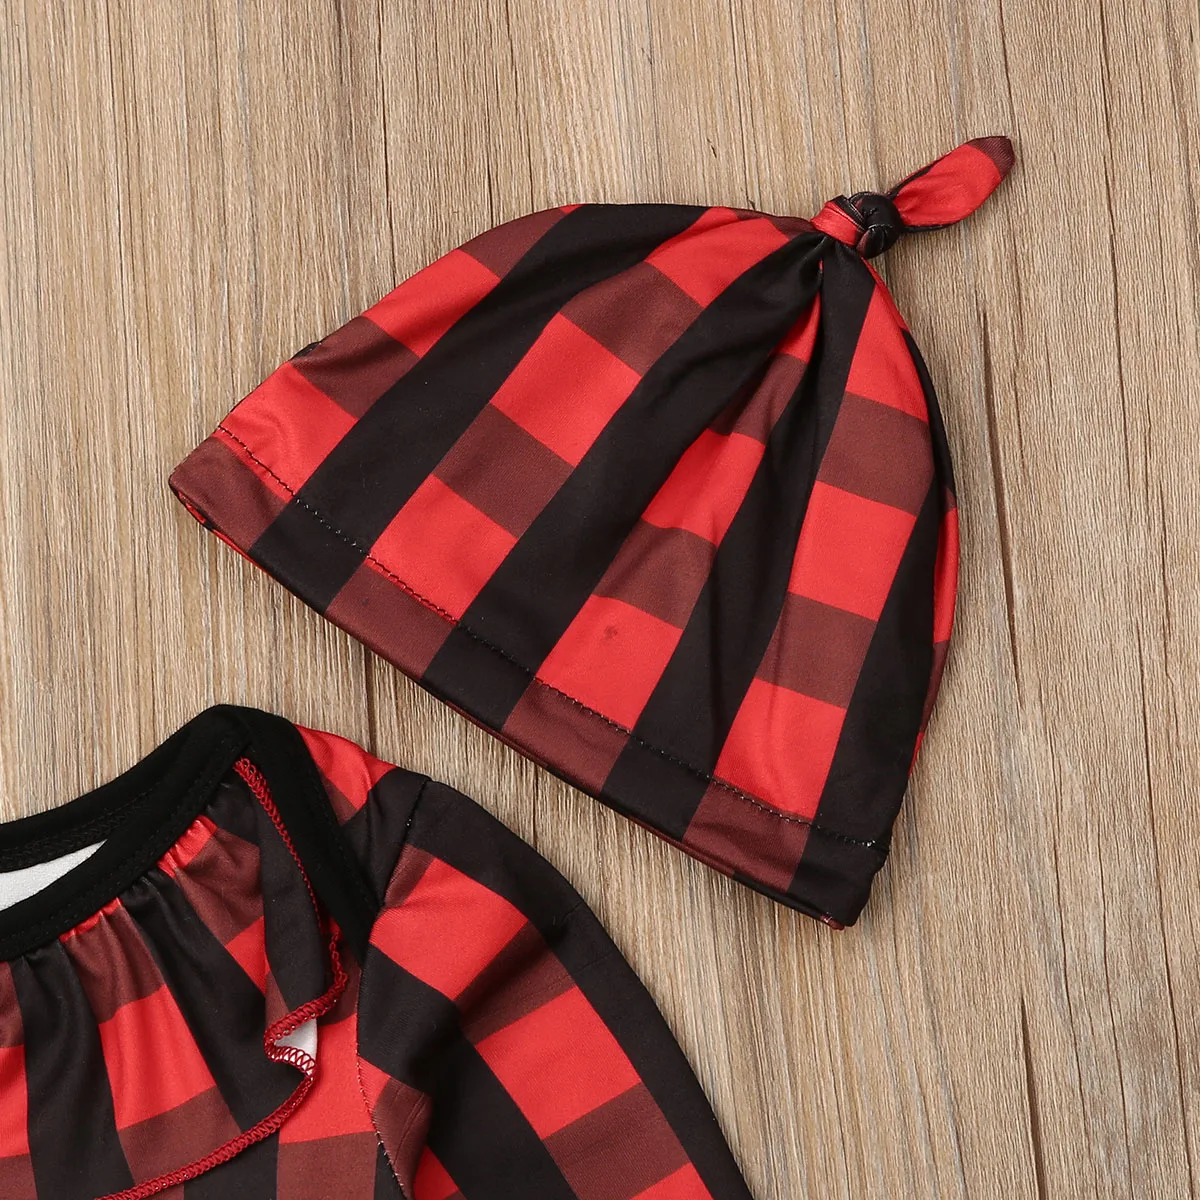 Newest Hot Newborn Baby Infant Christmas Plaid Swaddle Wrap Blanket Long Sleeve Sleeping Bag+Hat For 0-24 Months